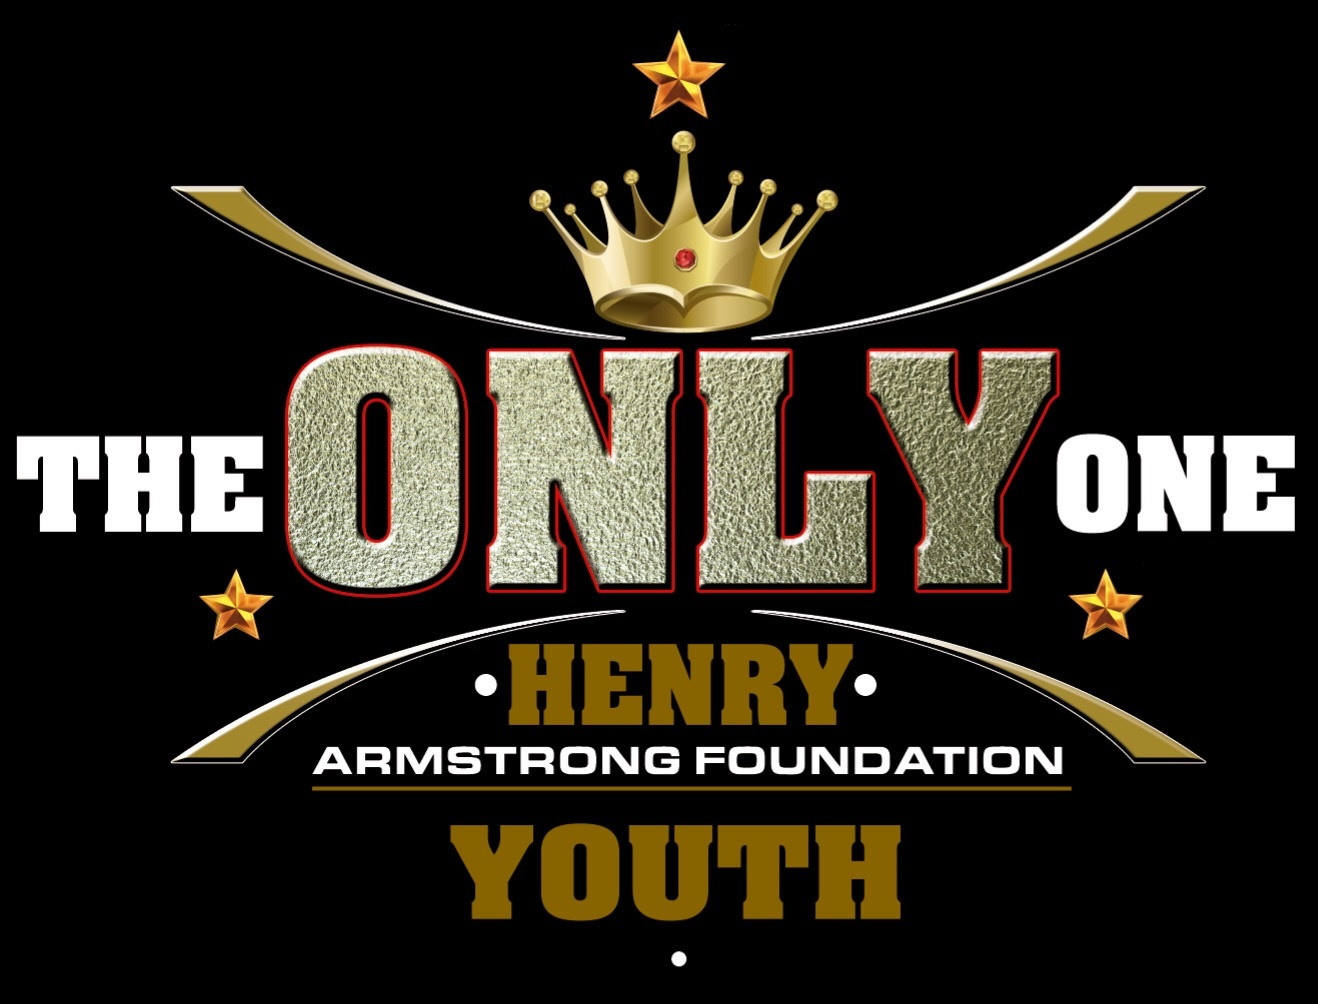 HENRY ARMSTRONG FOUNDATION, INC.